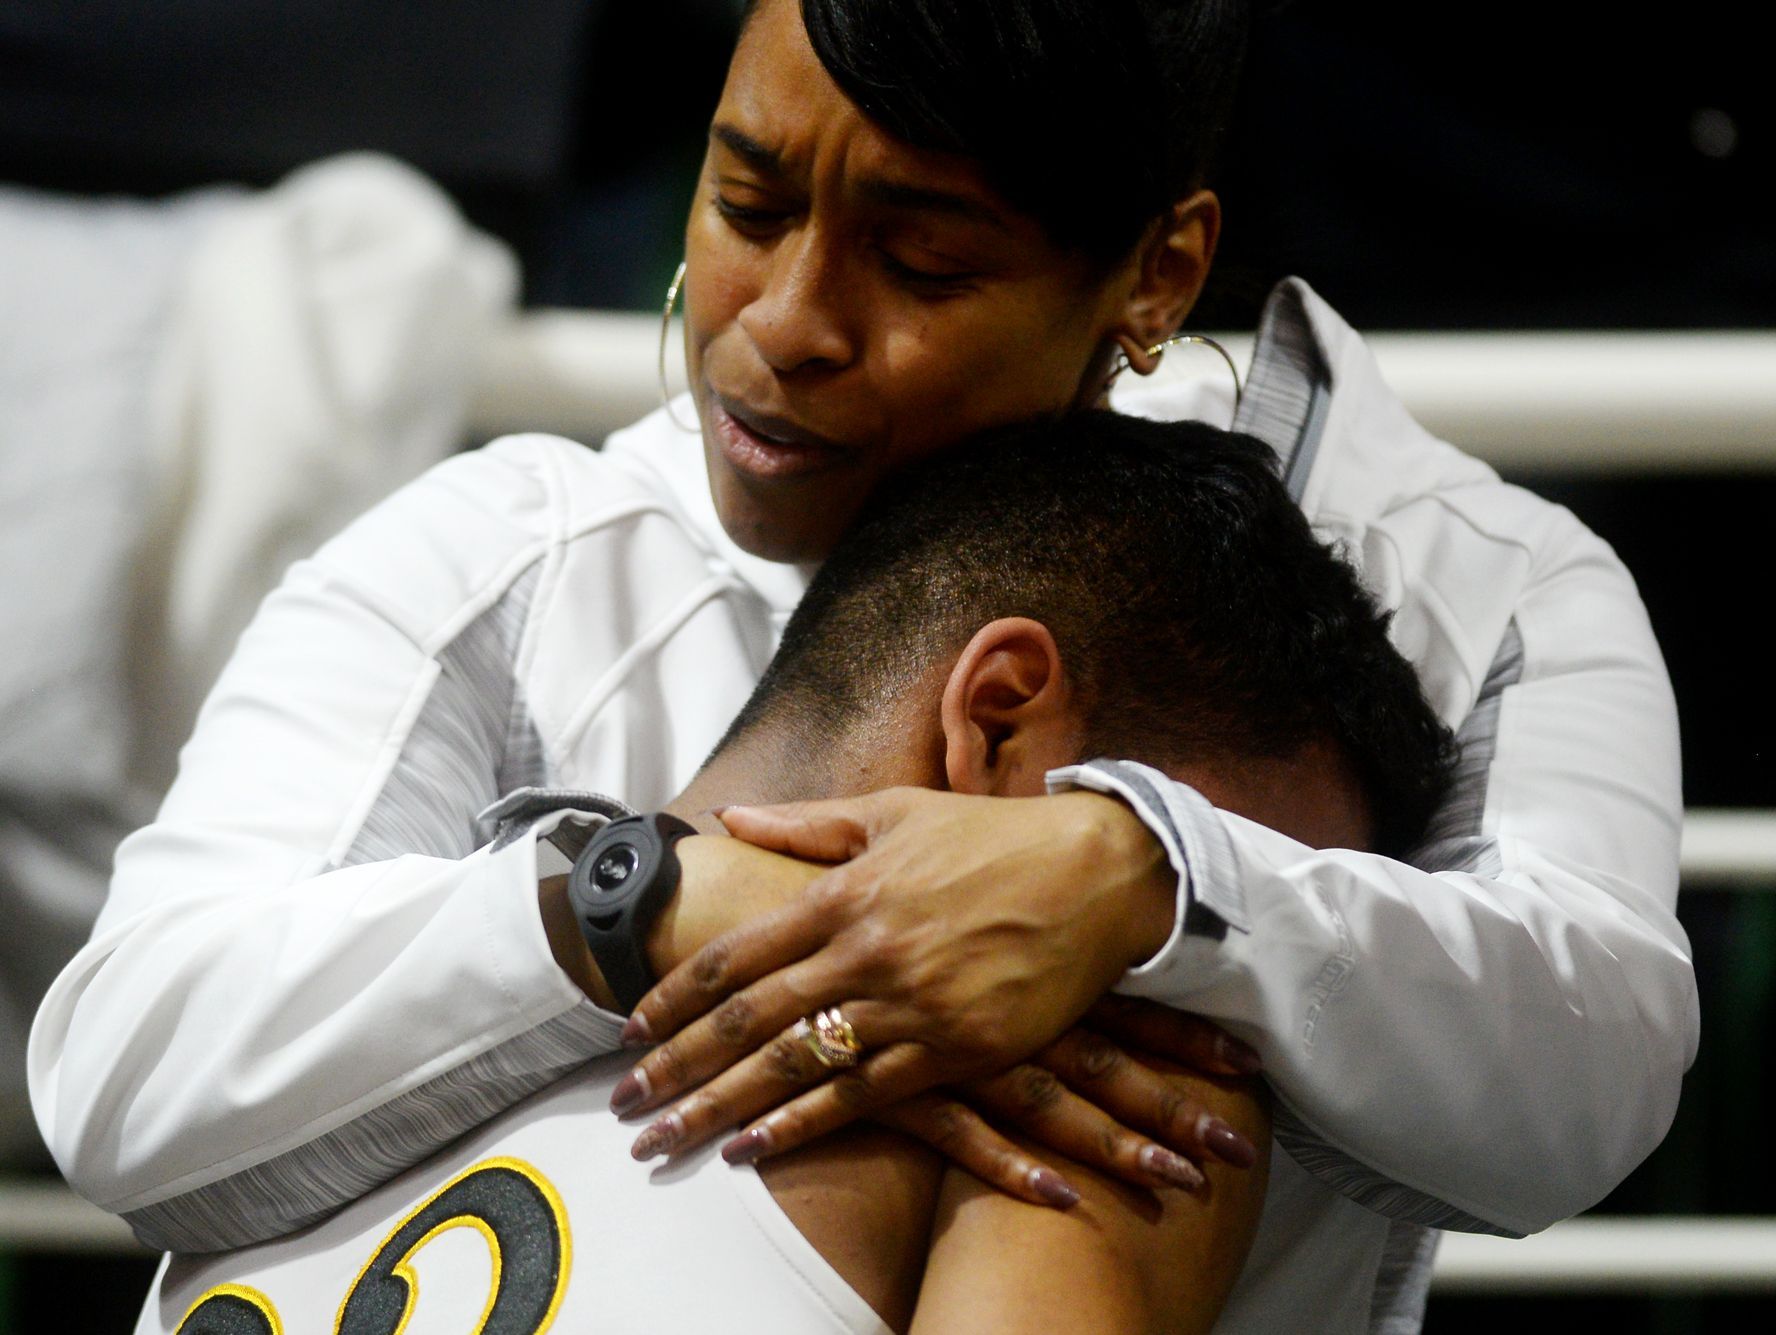 Lansing Christian's Forrest Bouyer is comforted after the team's loss in the Class D state semifinals against Buckley on Thursday, March 23, 2017 at the Breslin Center in East Lansing. Buckley won, 68-61.